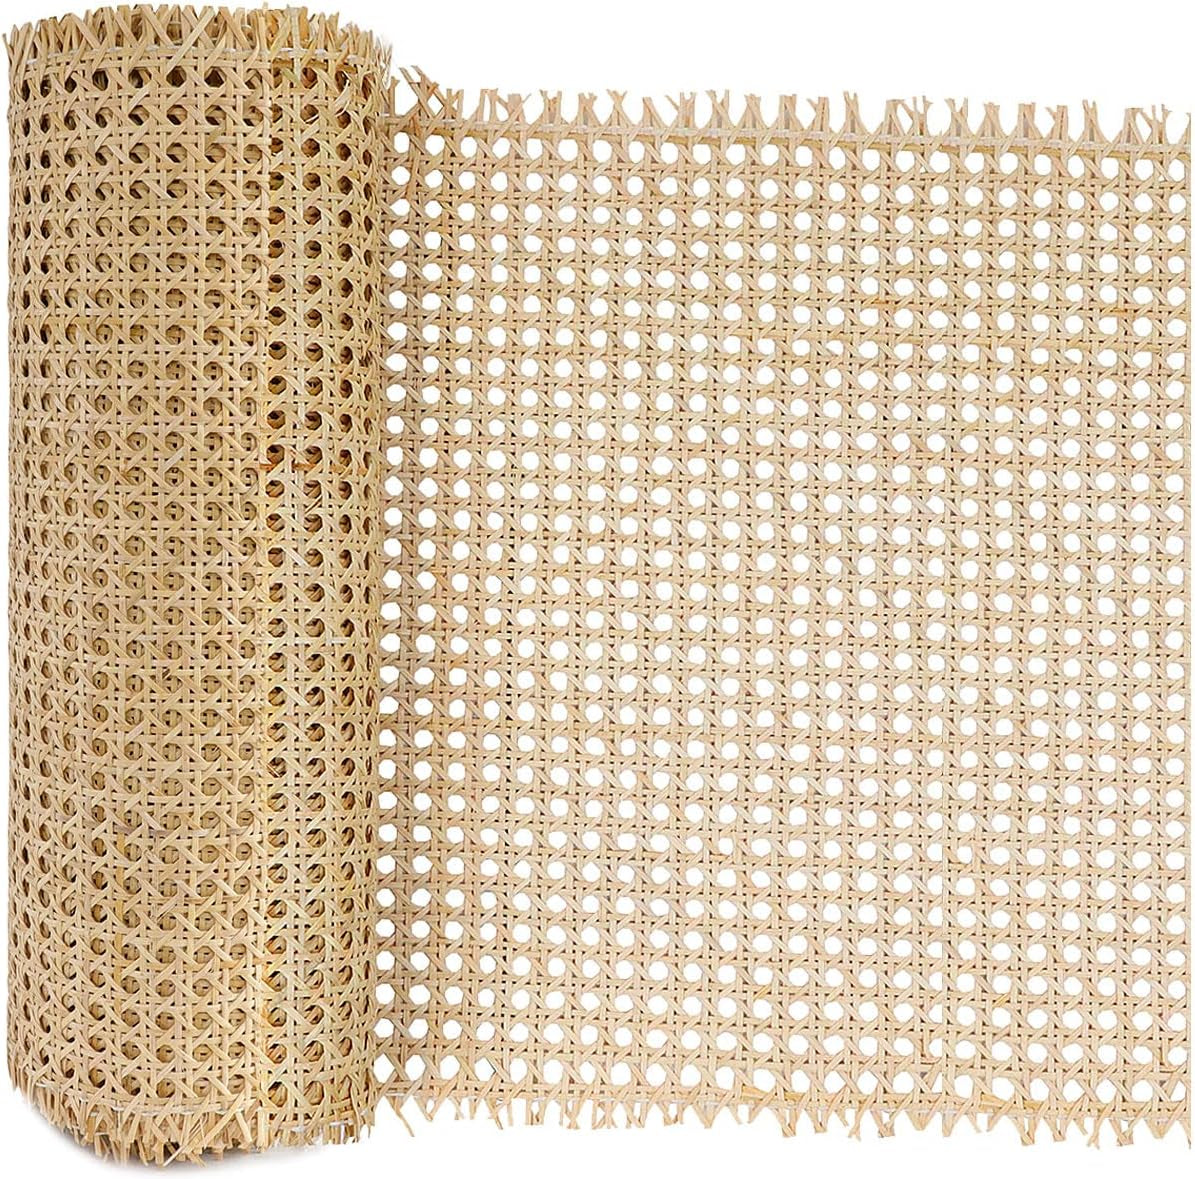 16" X5Ft Natural Rattan Cane Webbing, Woven Open Mesh Cane Net Roll for DIY Caning Furniture Decor Projects: Chair, Cabinet, Ceiling and Door(59X17 In)